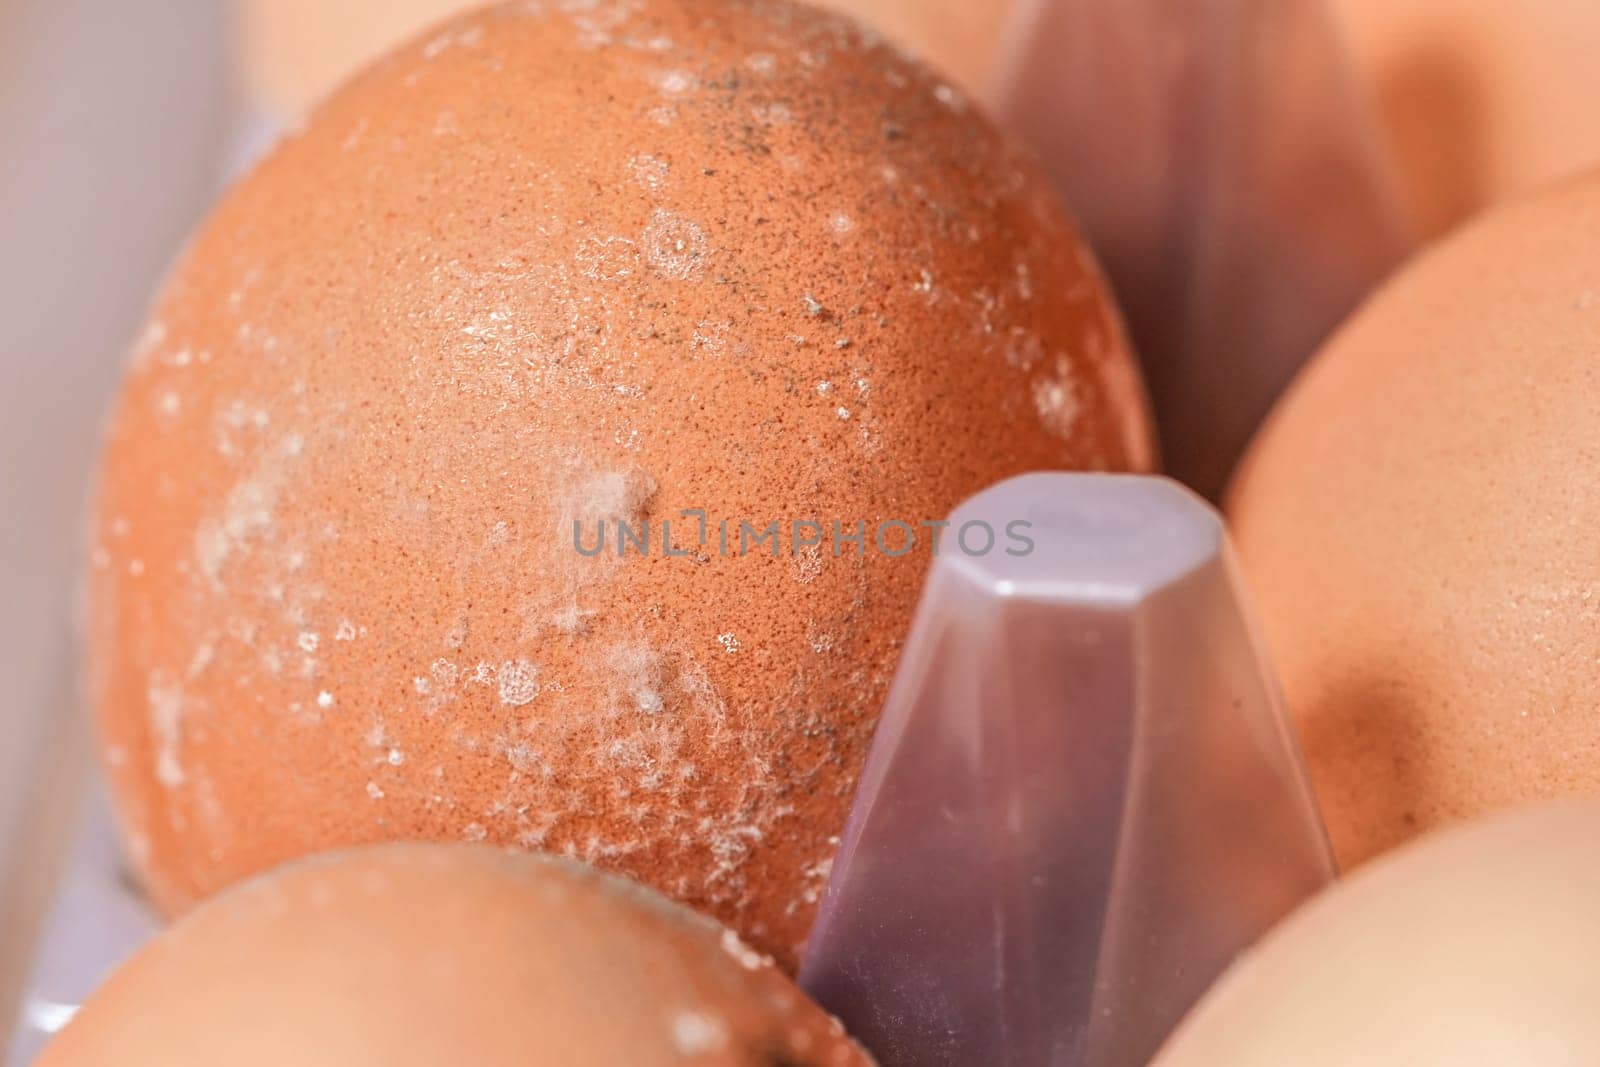 White mould / mildew closeup on egg shells - eggs gone bad after storing in wet conditions for long time
